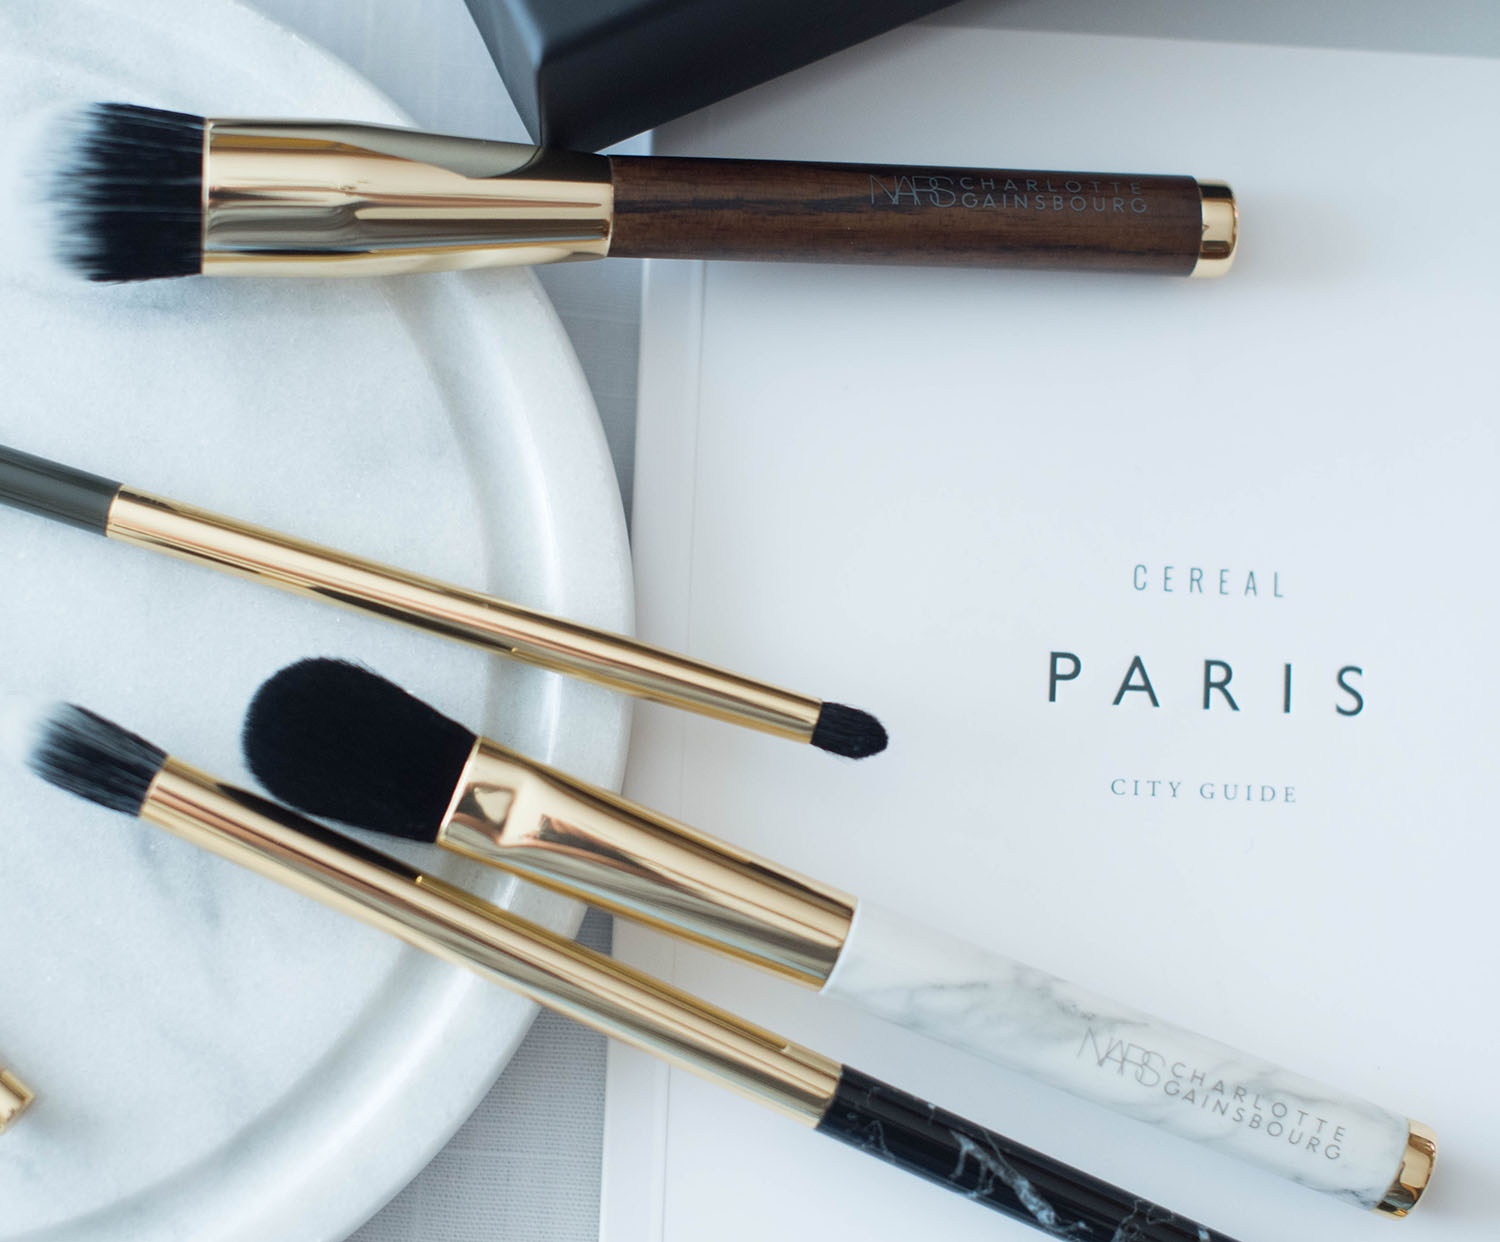 Make-up brushes from the Nars x Charlotte Gainsbourg collection, captured by beauty blogger Cee Fardoe of Coco & Vera